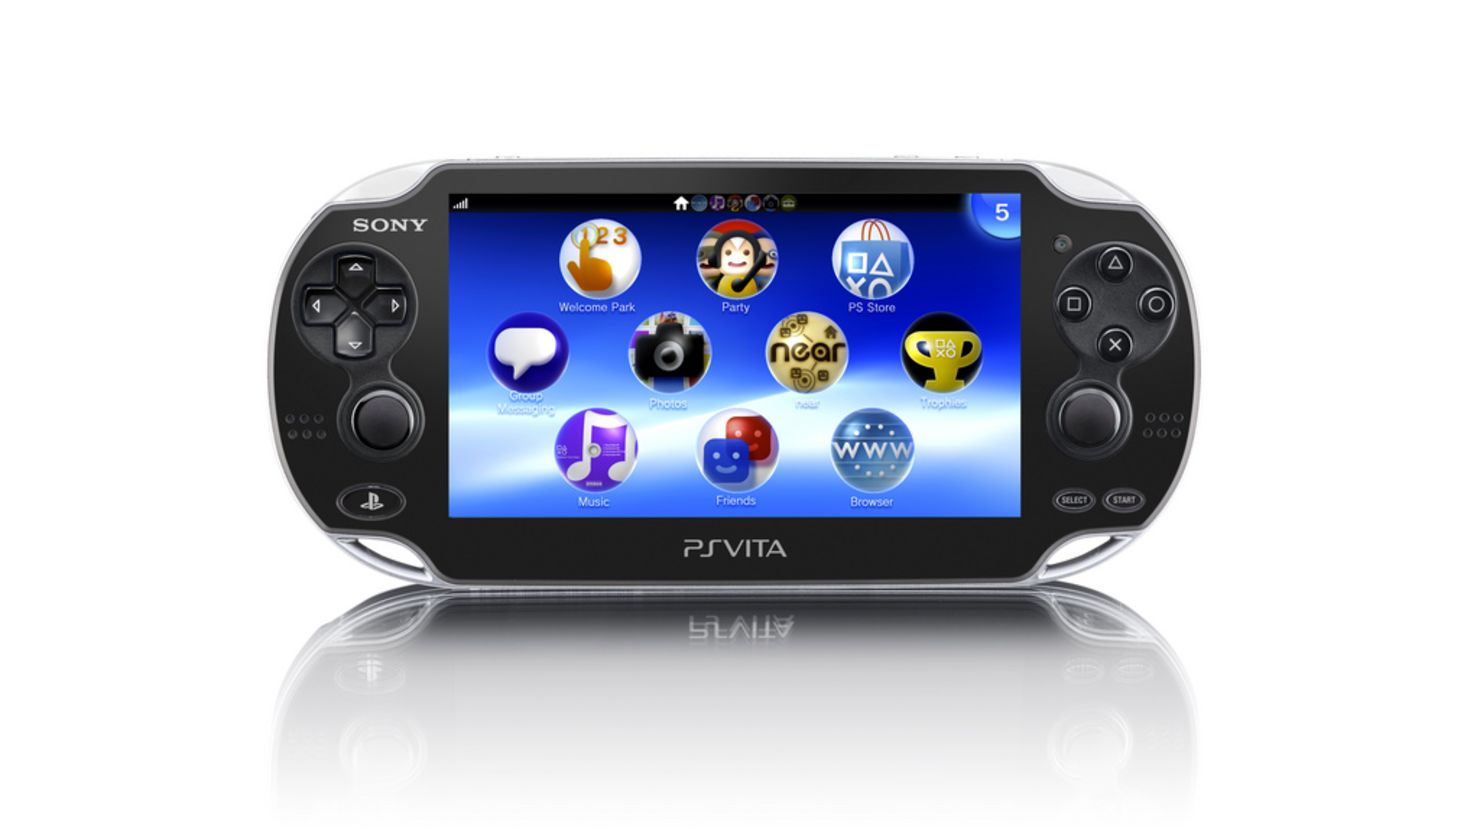 Sony's PS Vita device doesn't come preloaded with games, but more than two dozen are available for download.